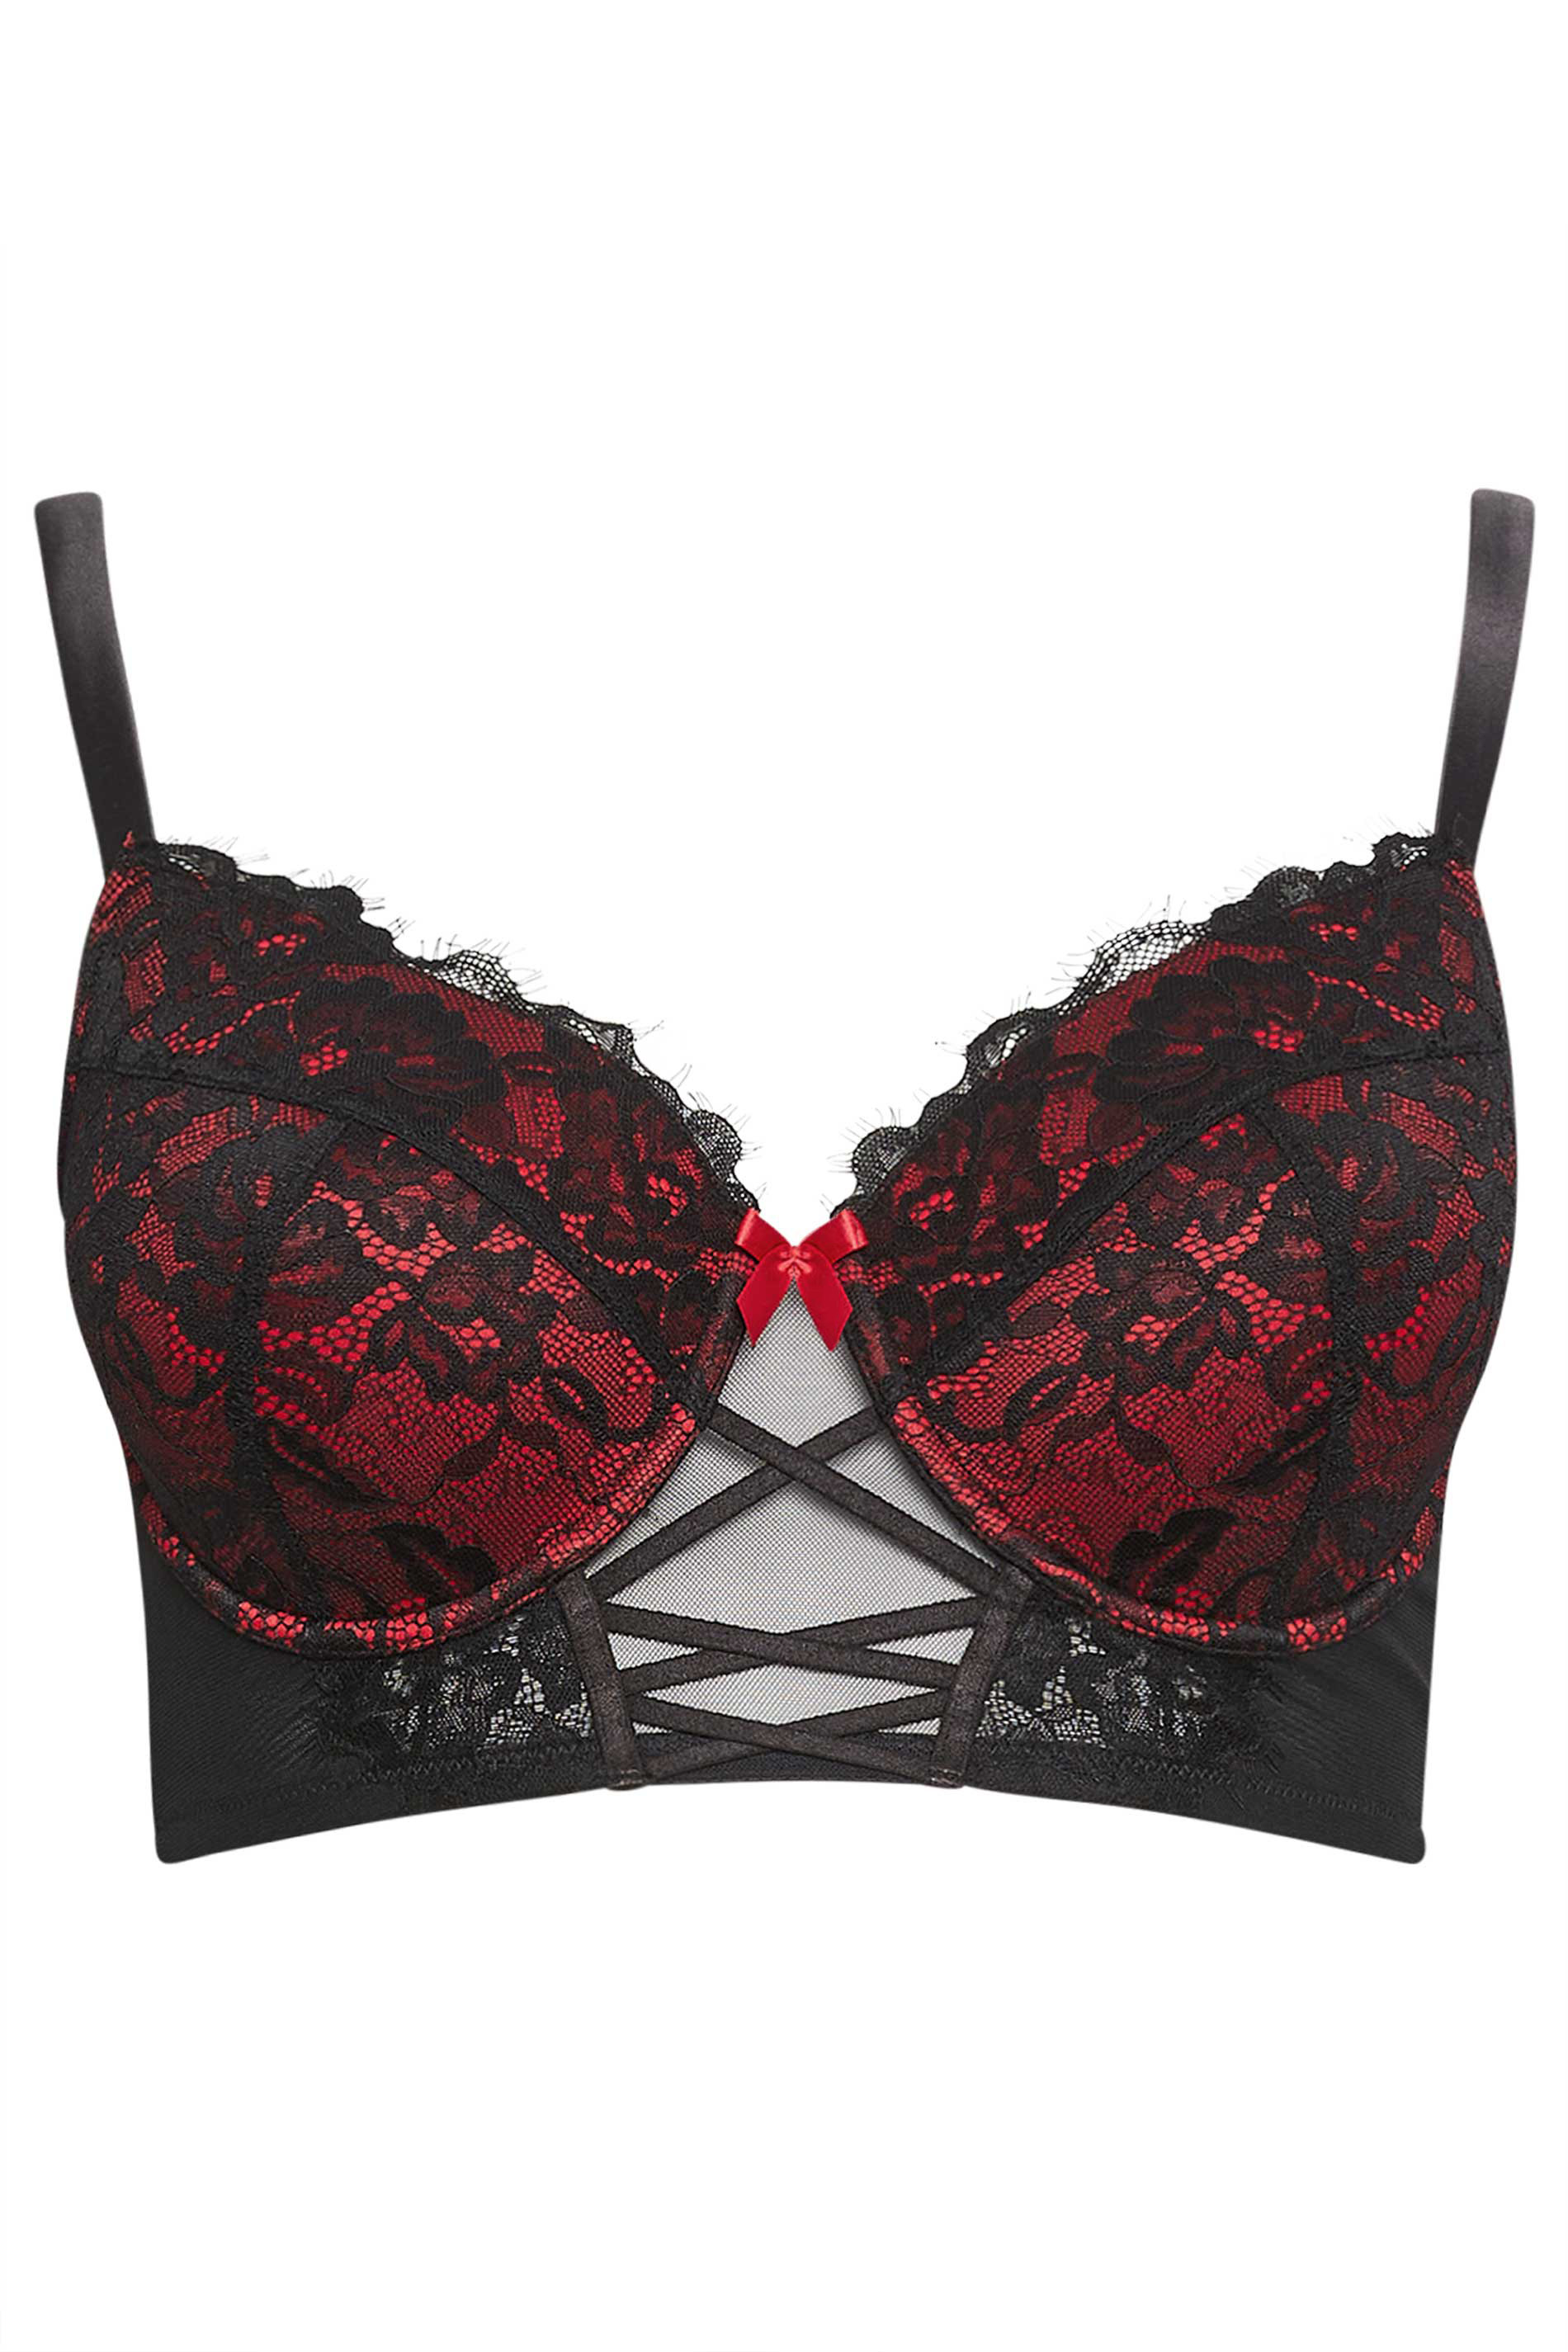 Women's Bras Strap Lace Bra Sexy Large Size Underwear Gathering Up Red Bra  Set for The Year of Life (Black, 70B) at  Women's Clothing store